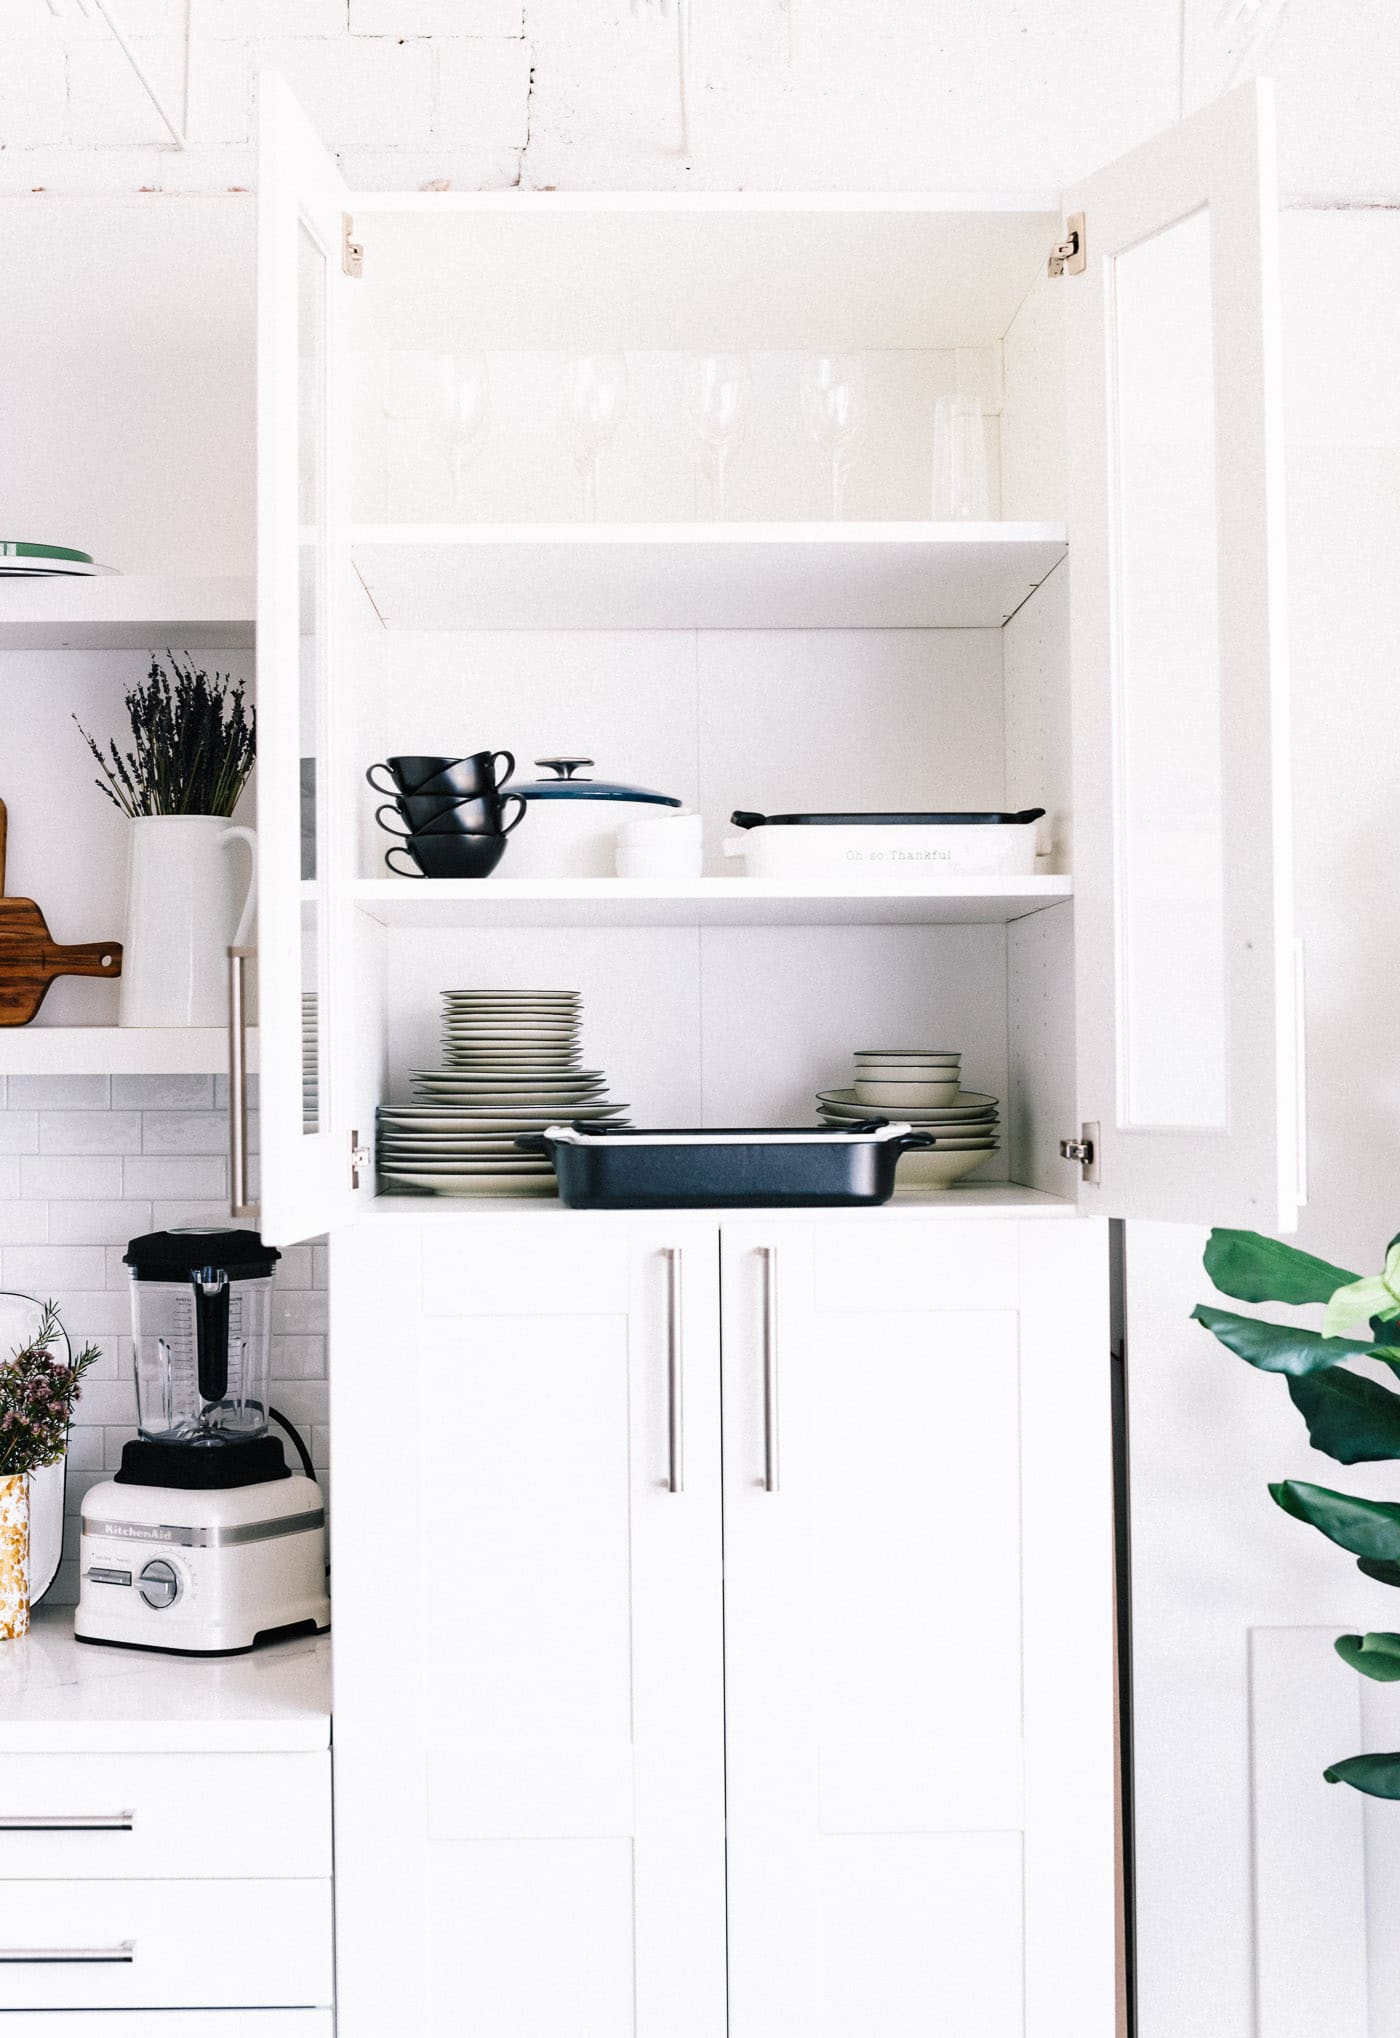 cabinets in studio, white and filled with baking dishes.